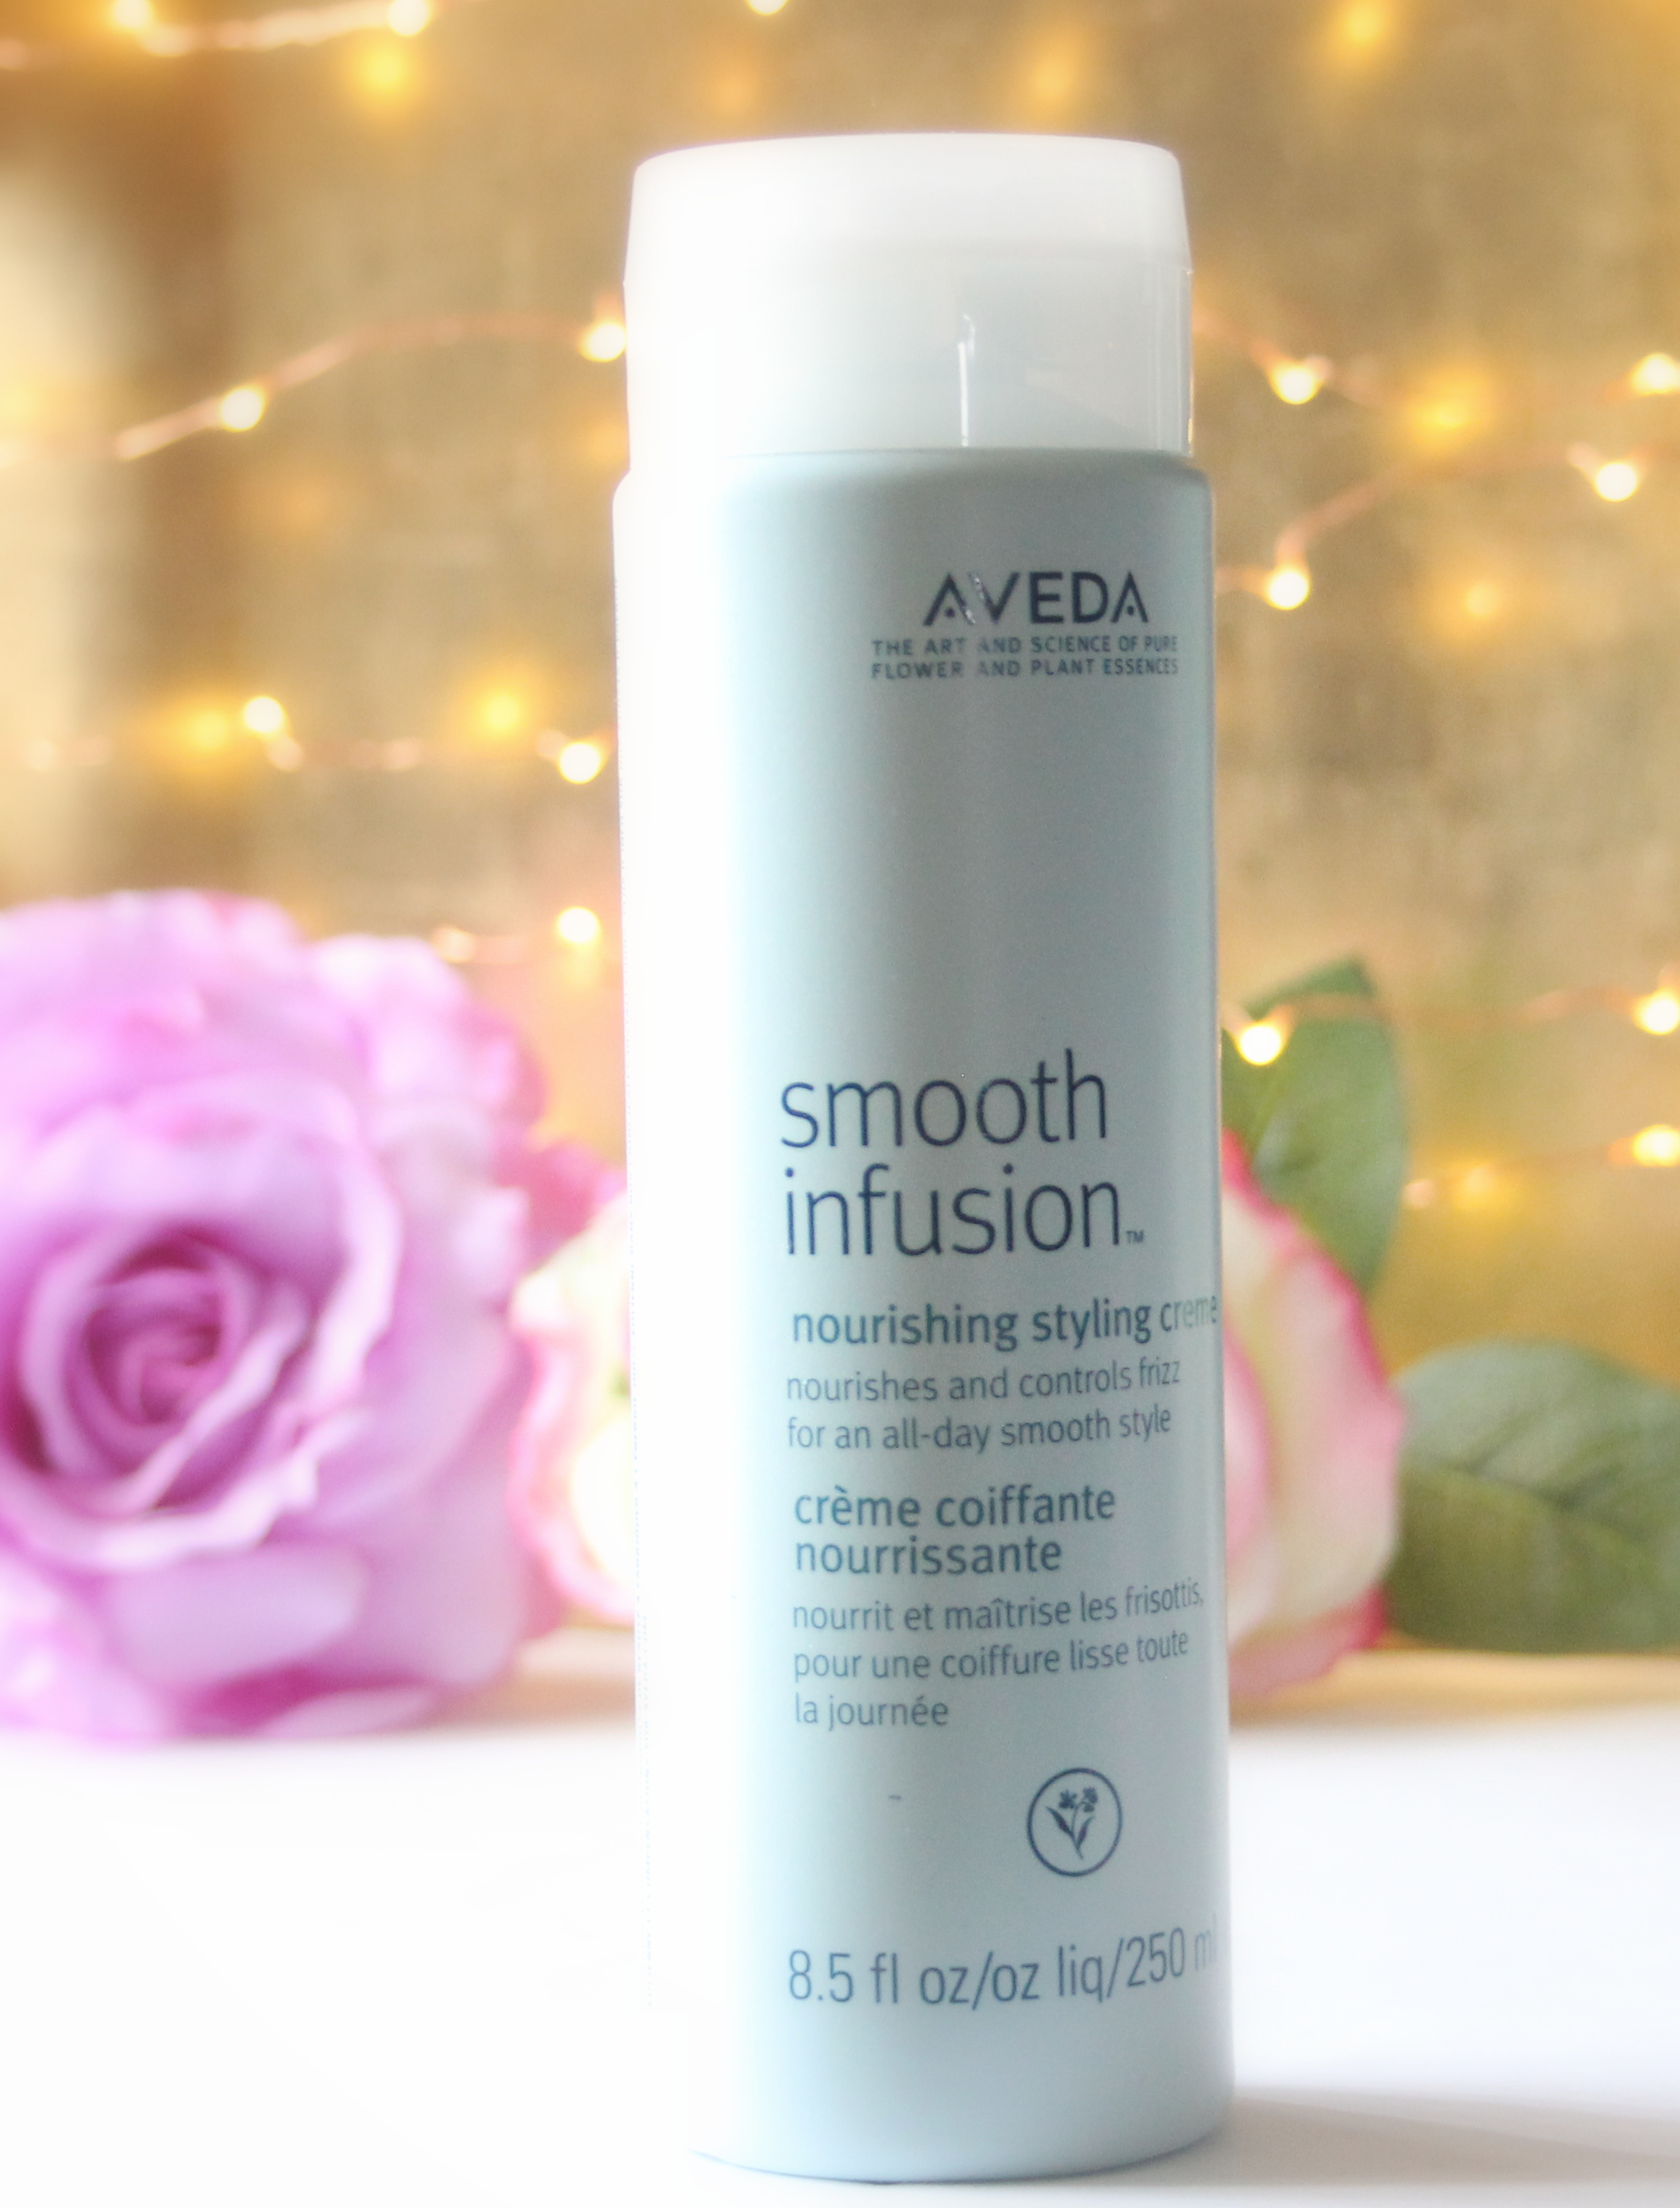 Aveda Smooth Infusion Nourishing Styling Creme Review